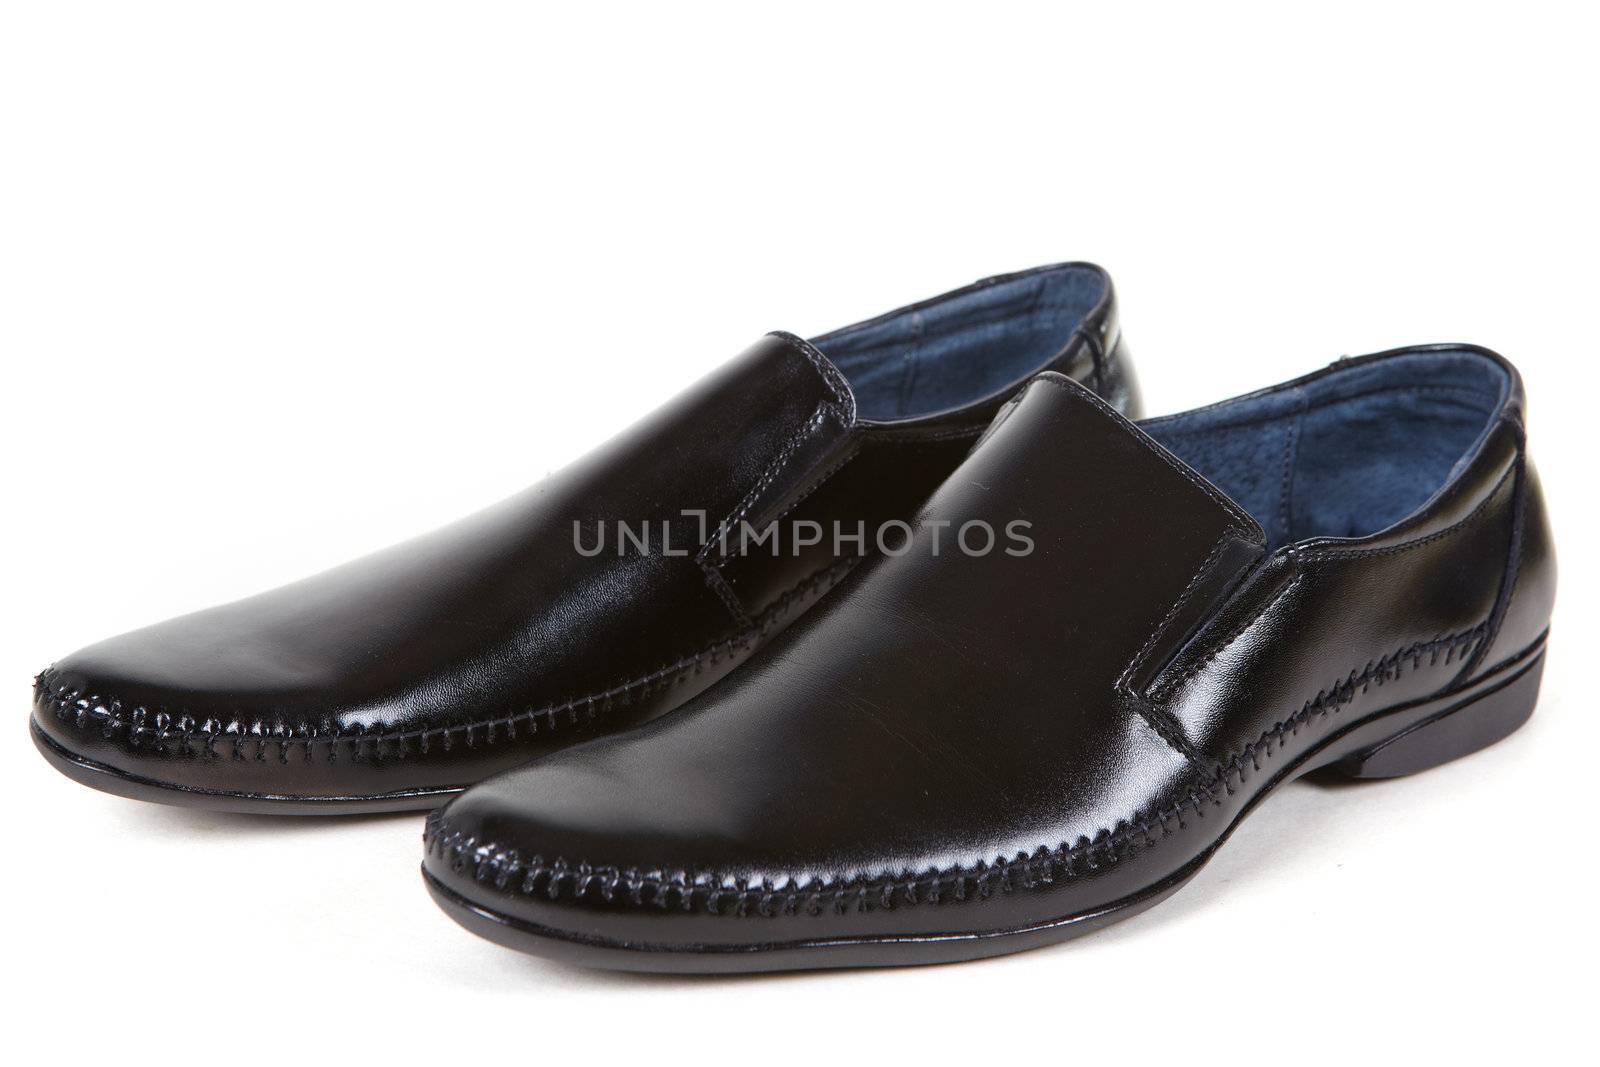 Patent-leather shoes by petrkurgan